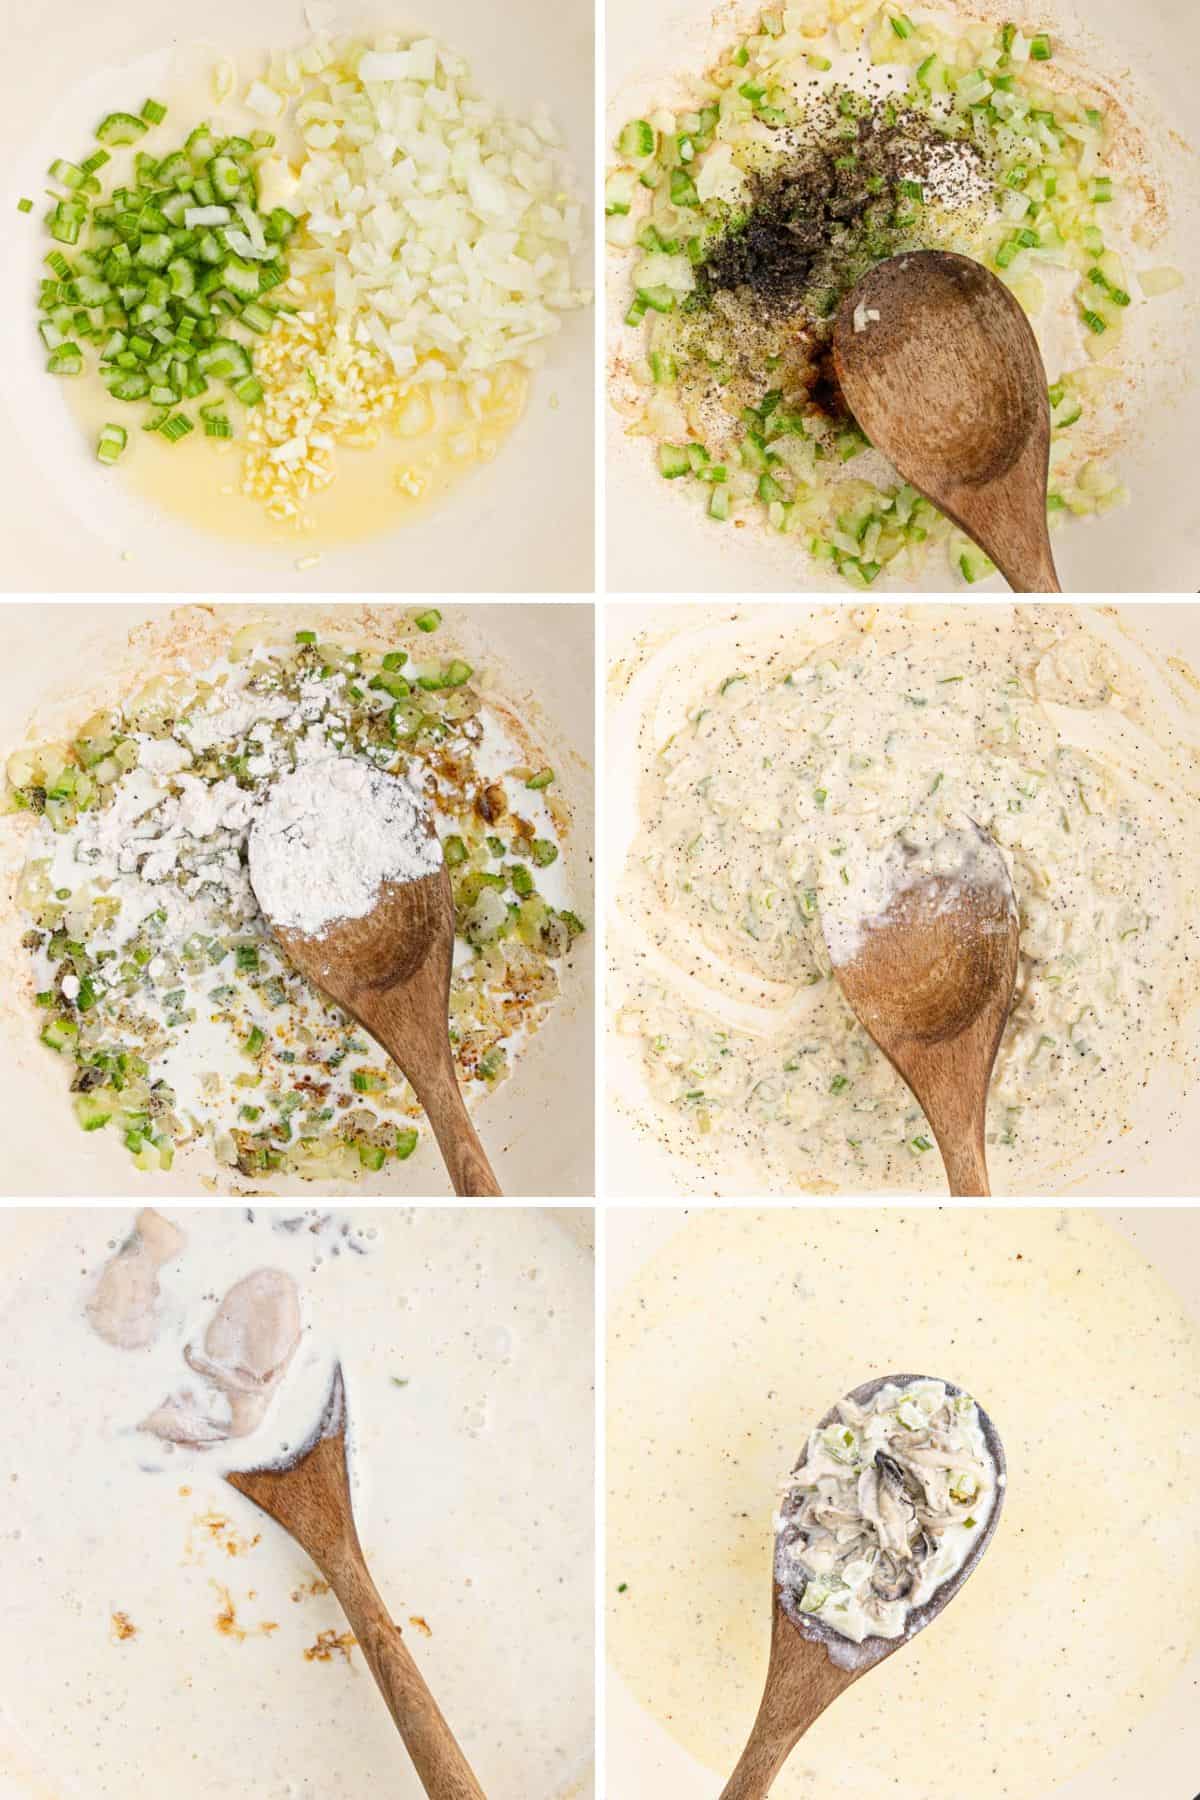 Collage of the steps for making oyster stew, including cooking the vegetables, thickening the stew, and adding the oysters